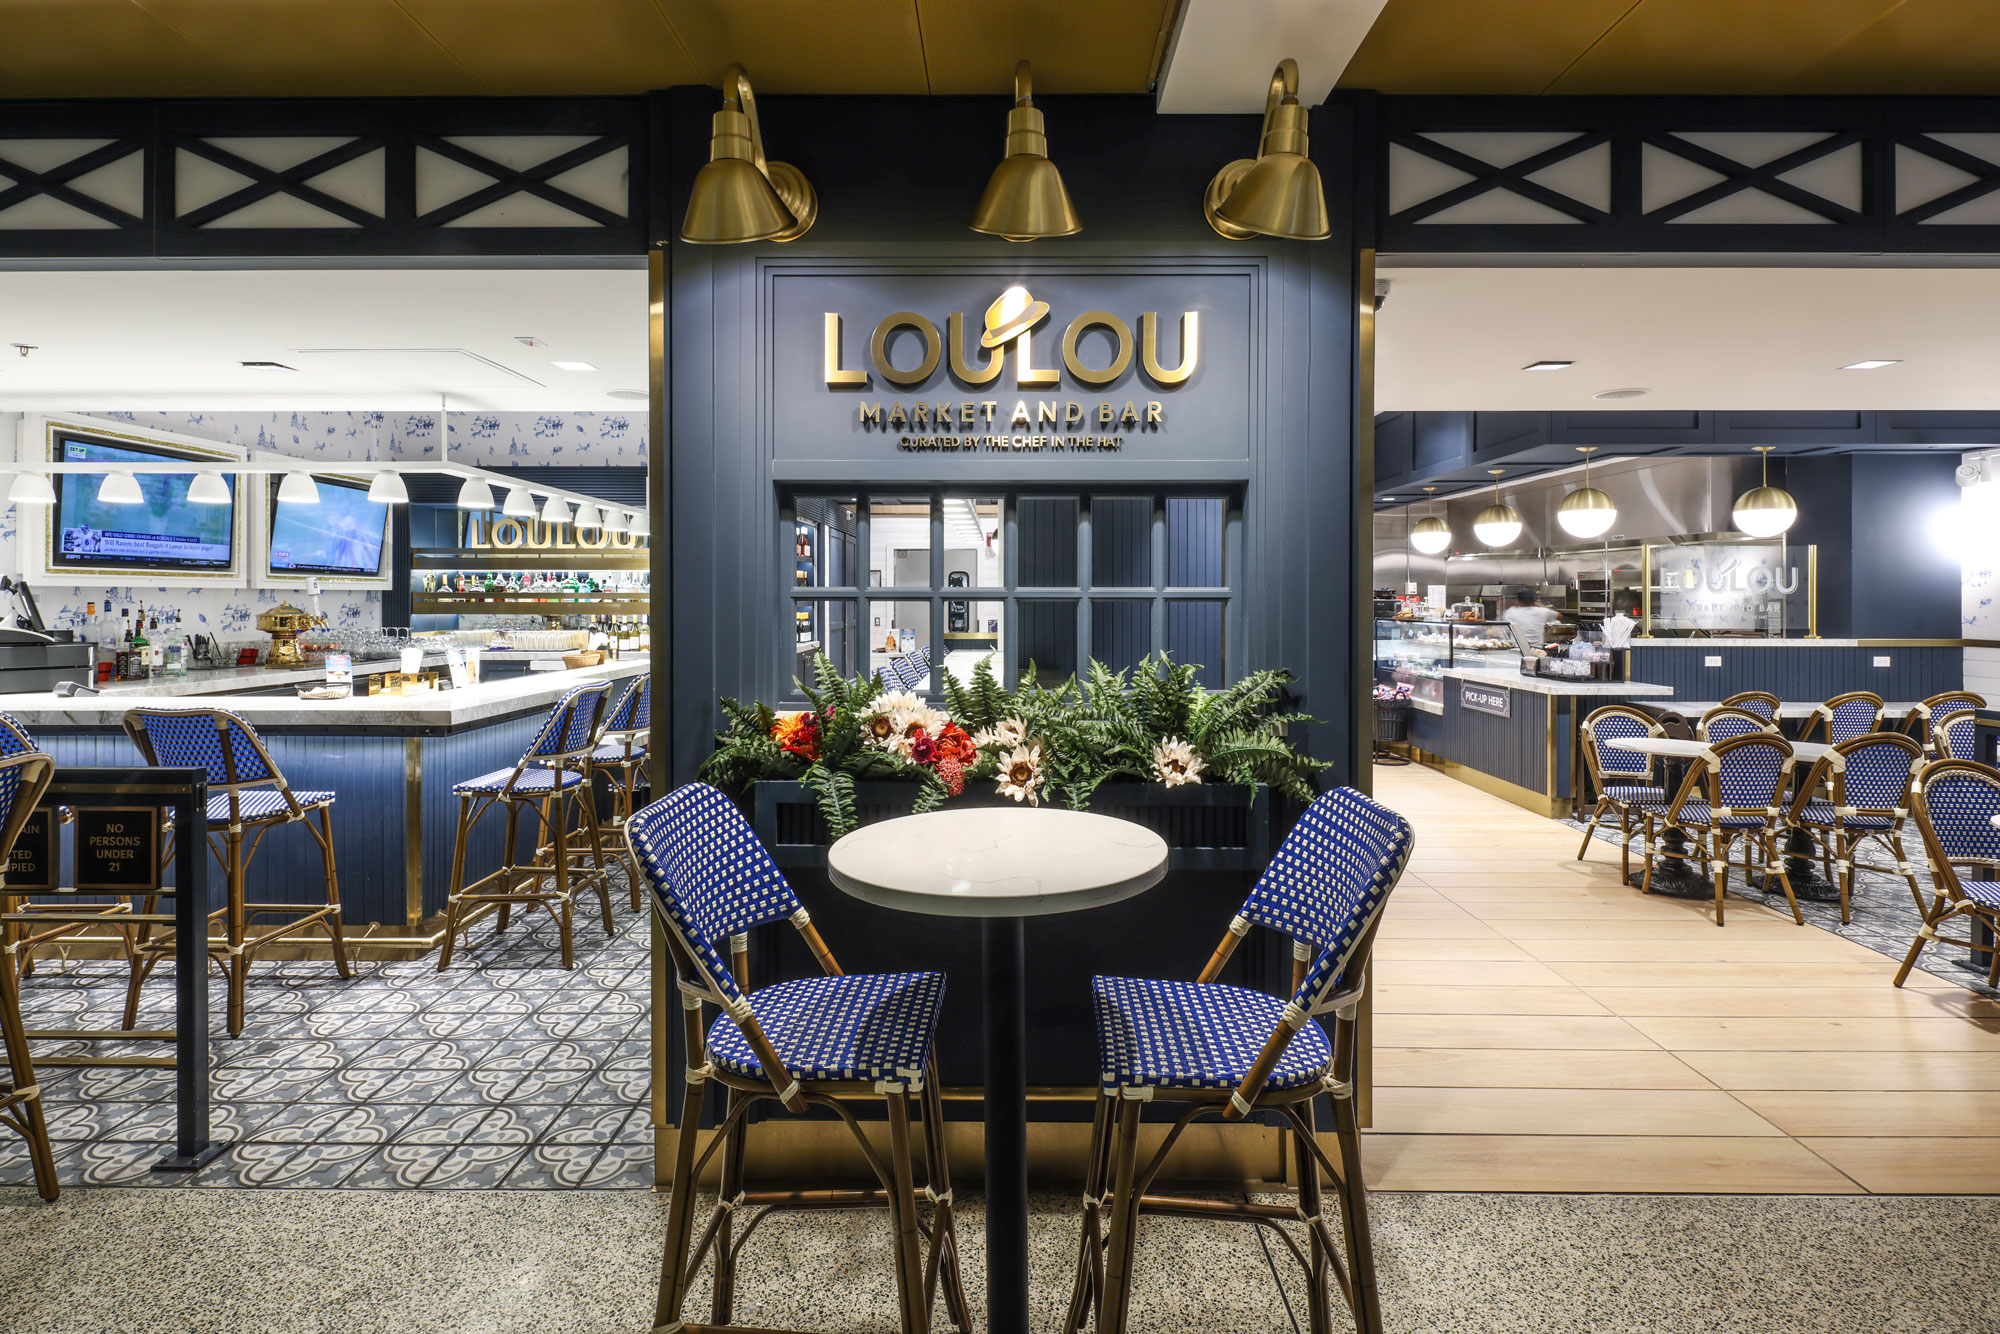 LouLou exterior with seating for two centered